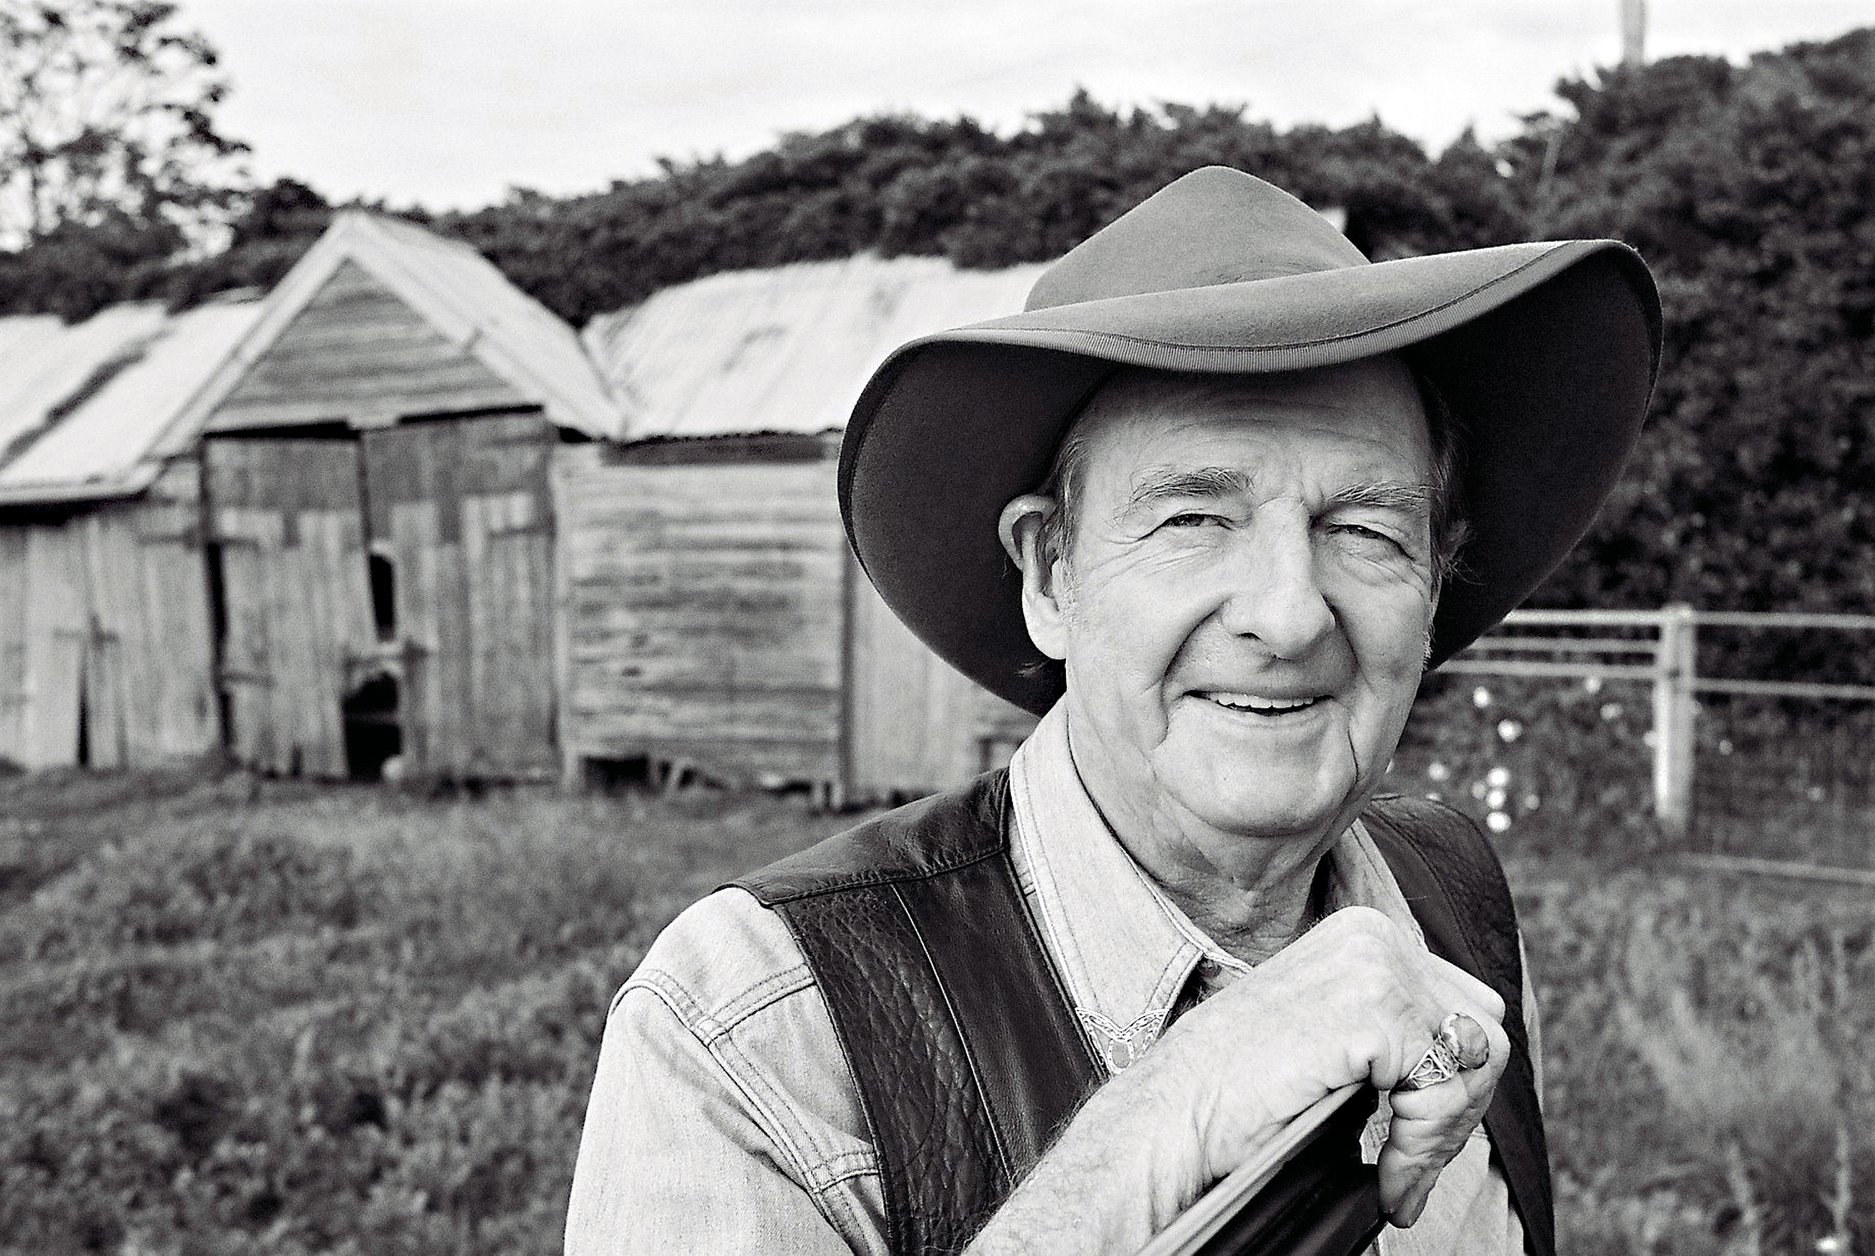 Slim-dusty-at-nulla-nulla-in-black-and-white-headsho